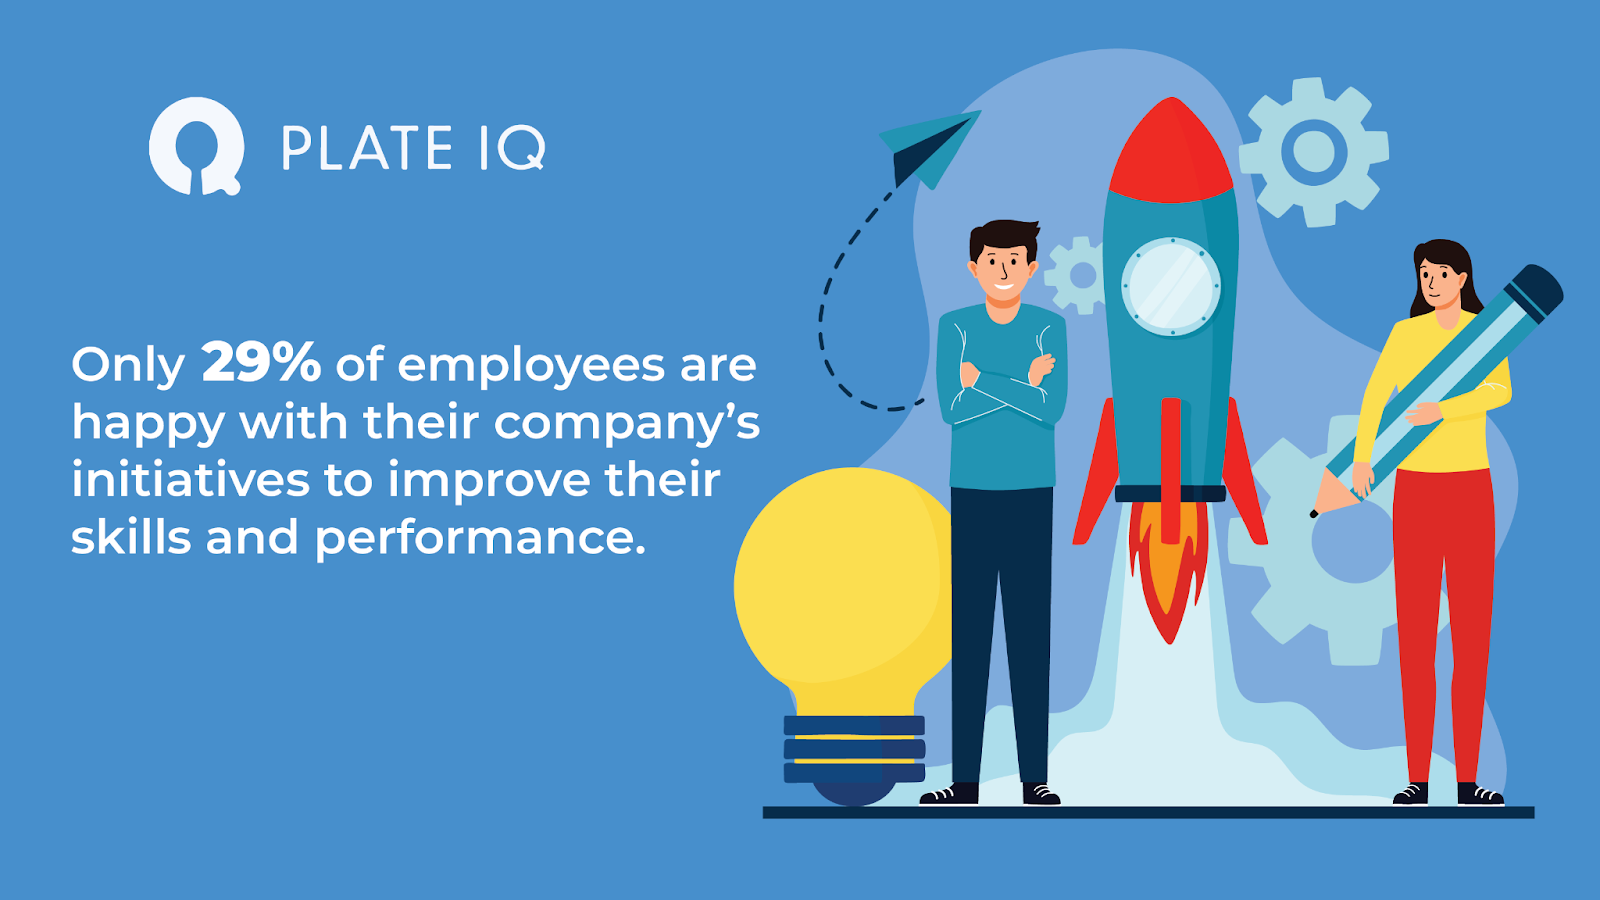 Cartoon of a happy person next to a rocketship, and another person holding a giant pencil. Scale your business by investing in employees’ skills and well-being. Only 29% of employees are happy with their company's initiatives to improve their skills and performance, according to Deloitte.